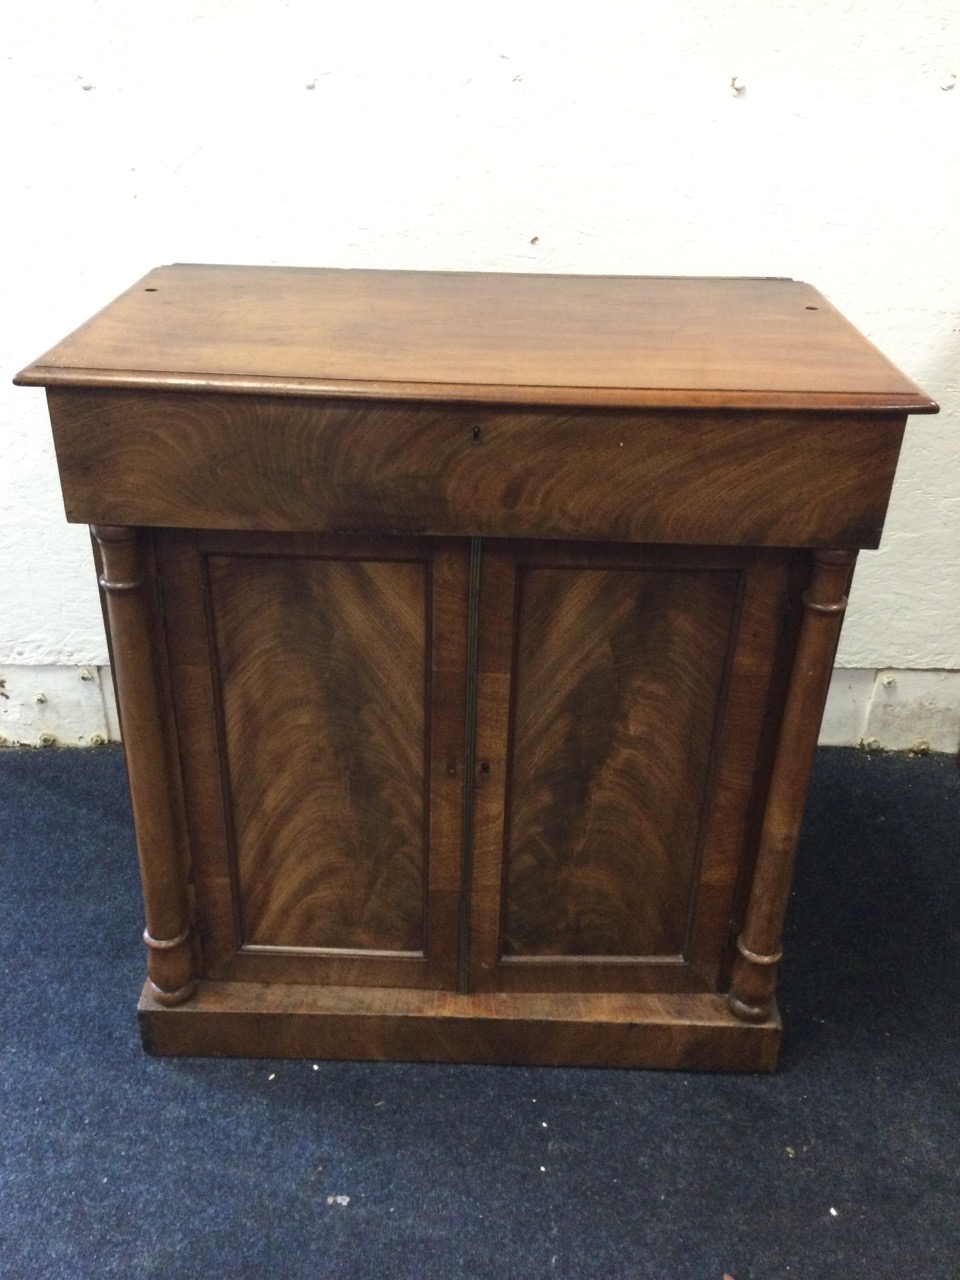 A C19th mahogany chiffonnier with rectangular moulded top above a frieze drawer and a pair of - Image 3 of 3